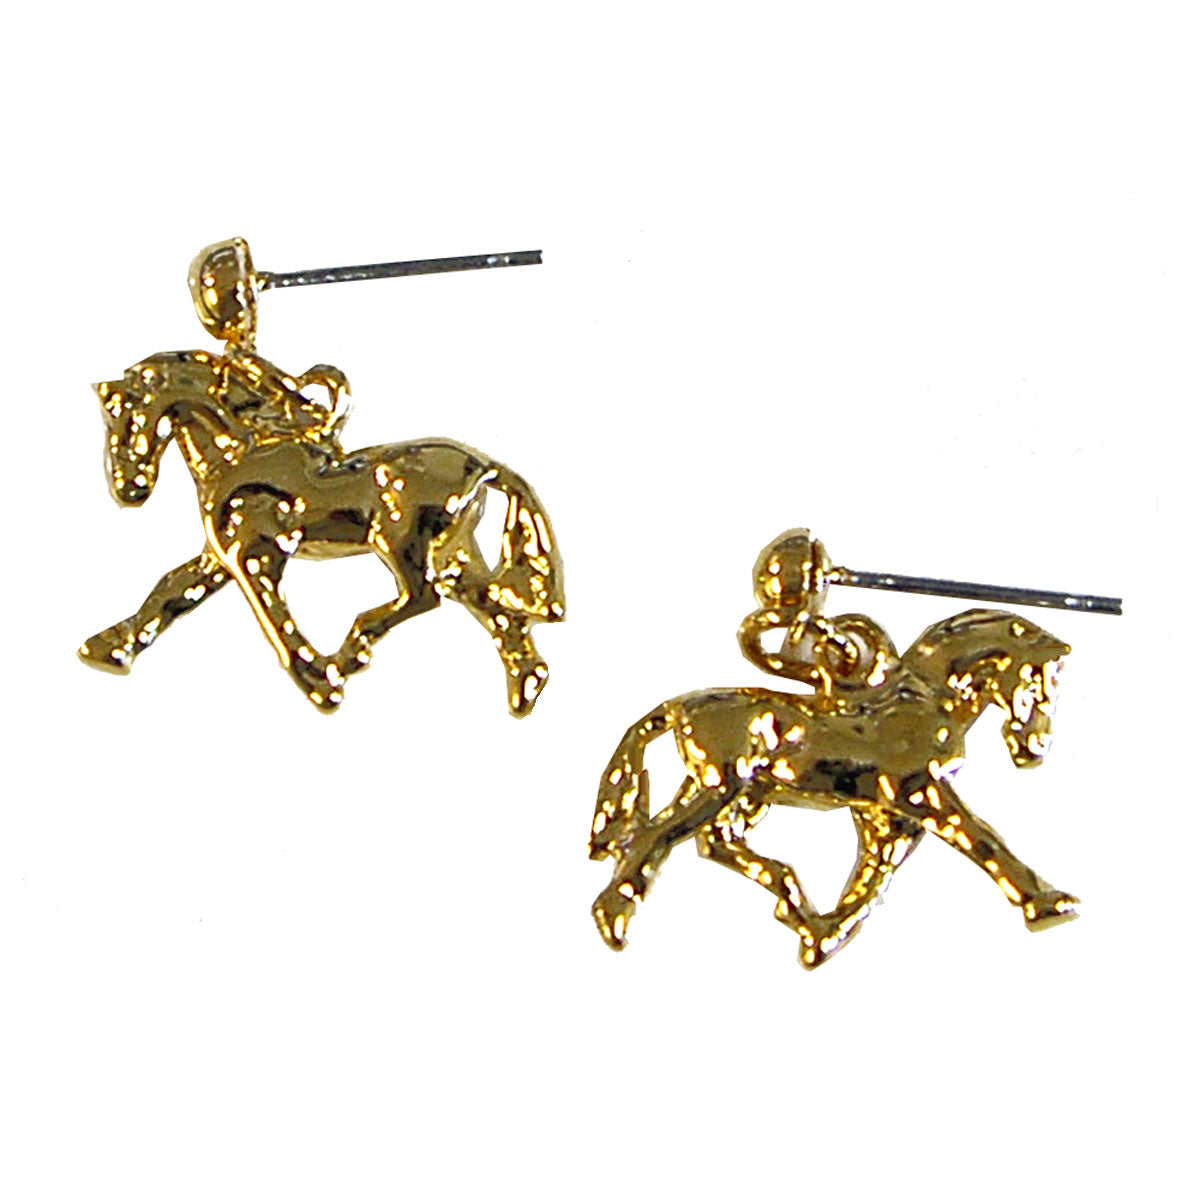 Dressage Horse and Rider Earrings - Gold Plated